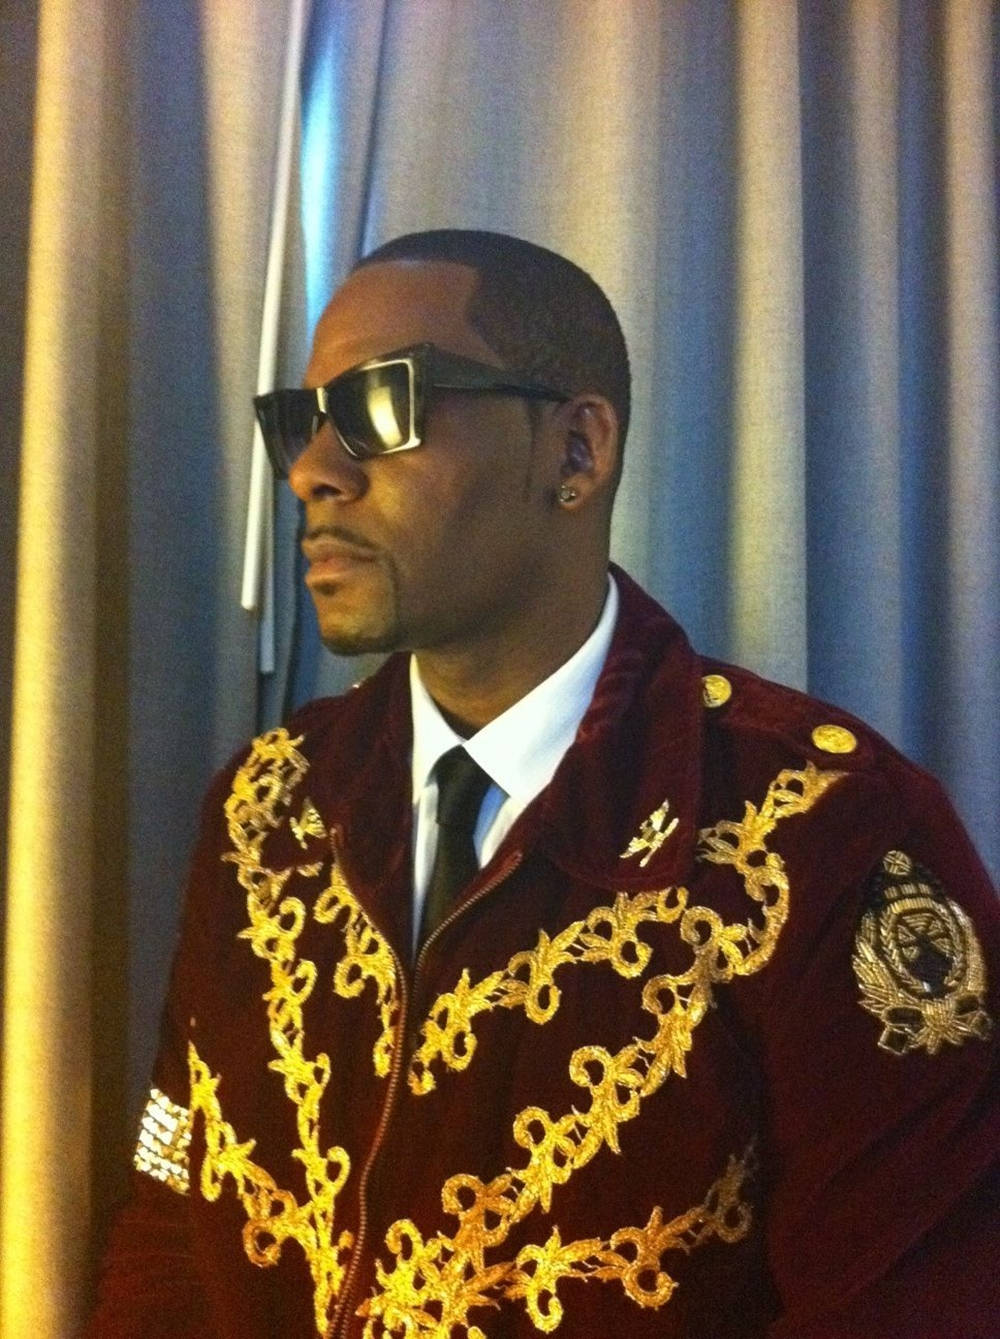 Singer R Kelly In Concert Outfit Wallpaper